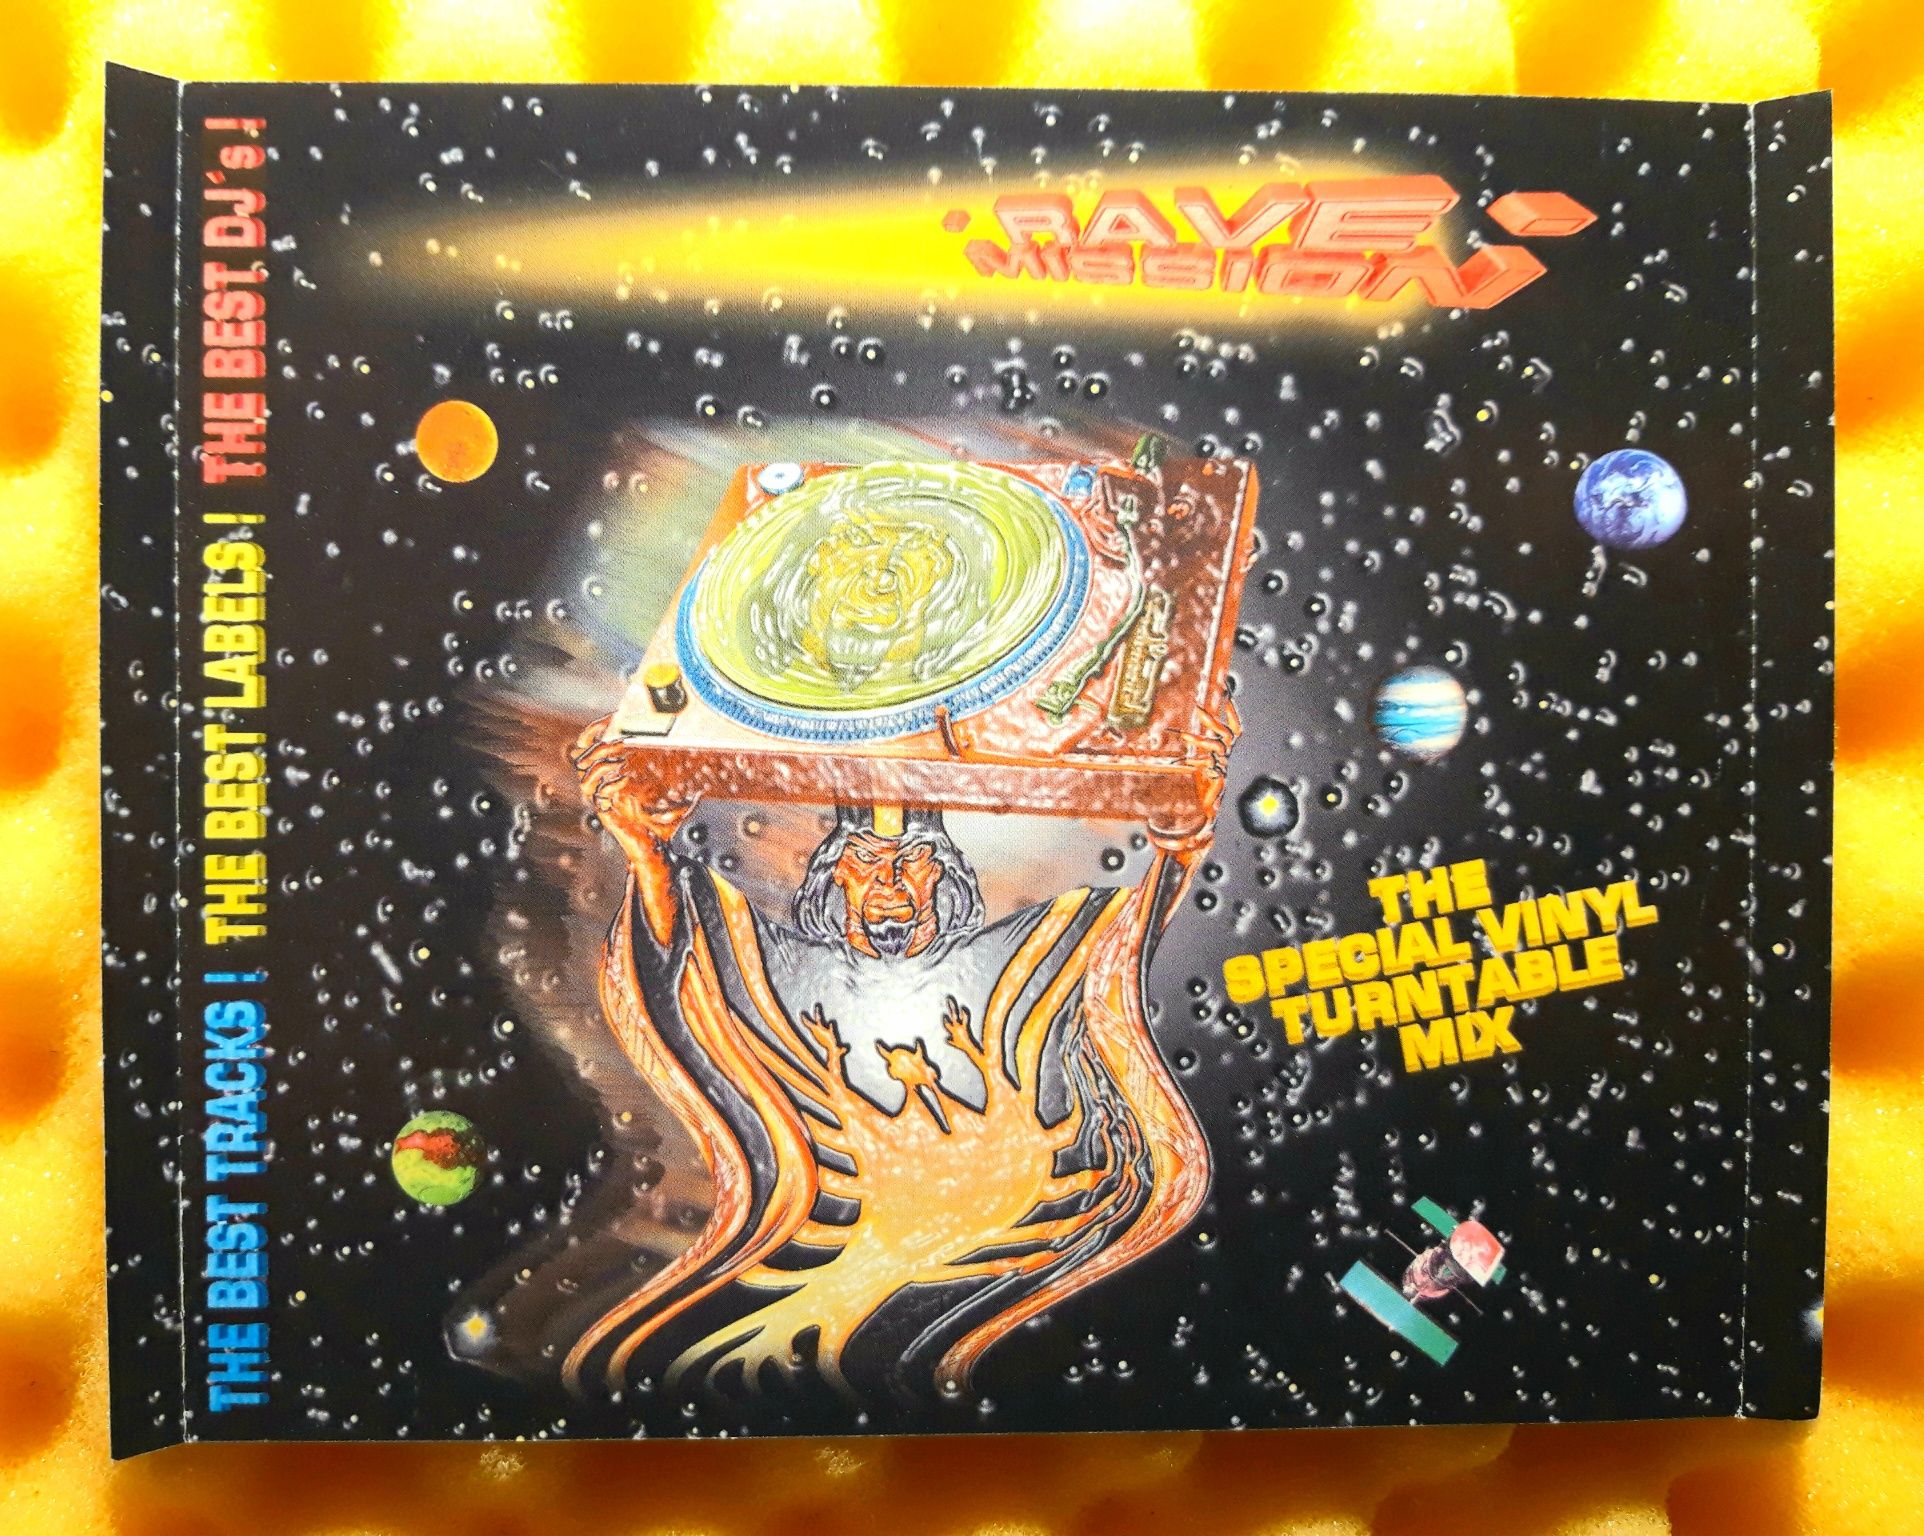 Rave Mission - The Special Vinyl Turntable Mix (CD, 1995)